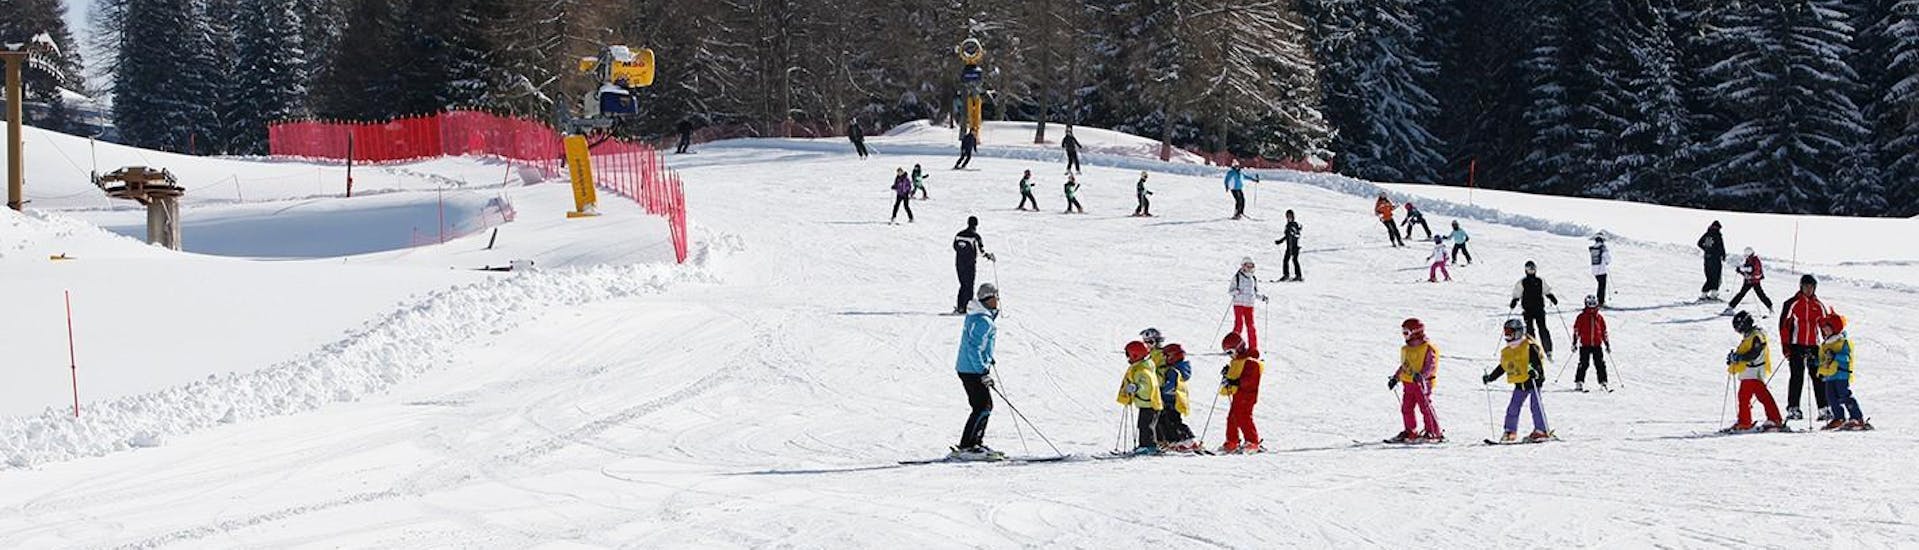 A group of kids going down the slope during a ski lesson in Folgaria with Scuola Italiana Sci Folgaria - Fondo Grande.